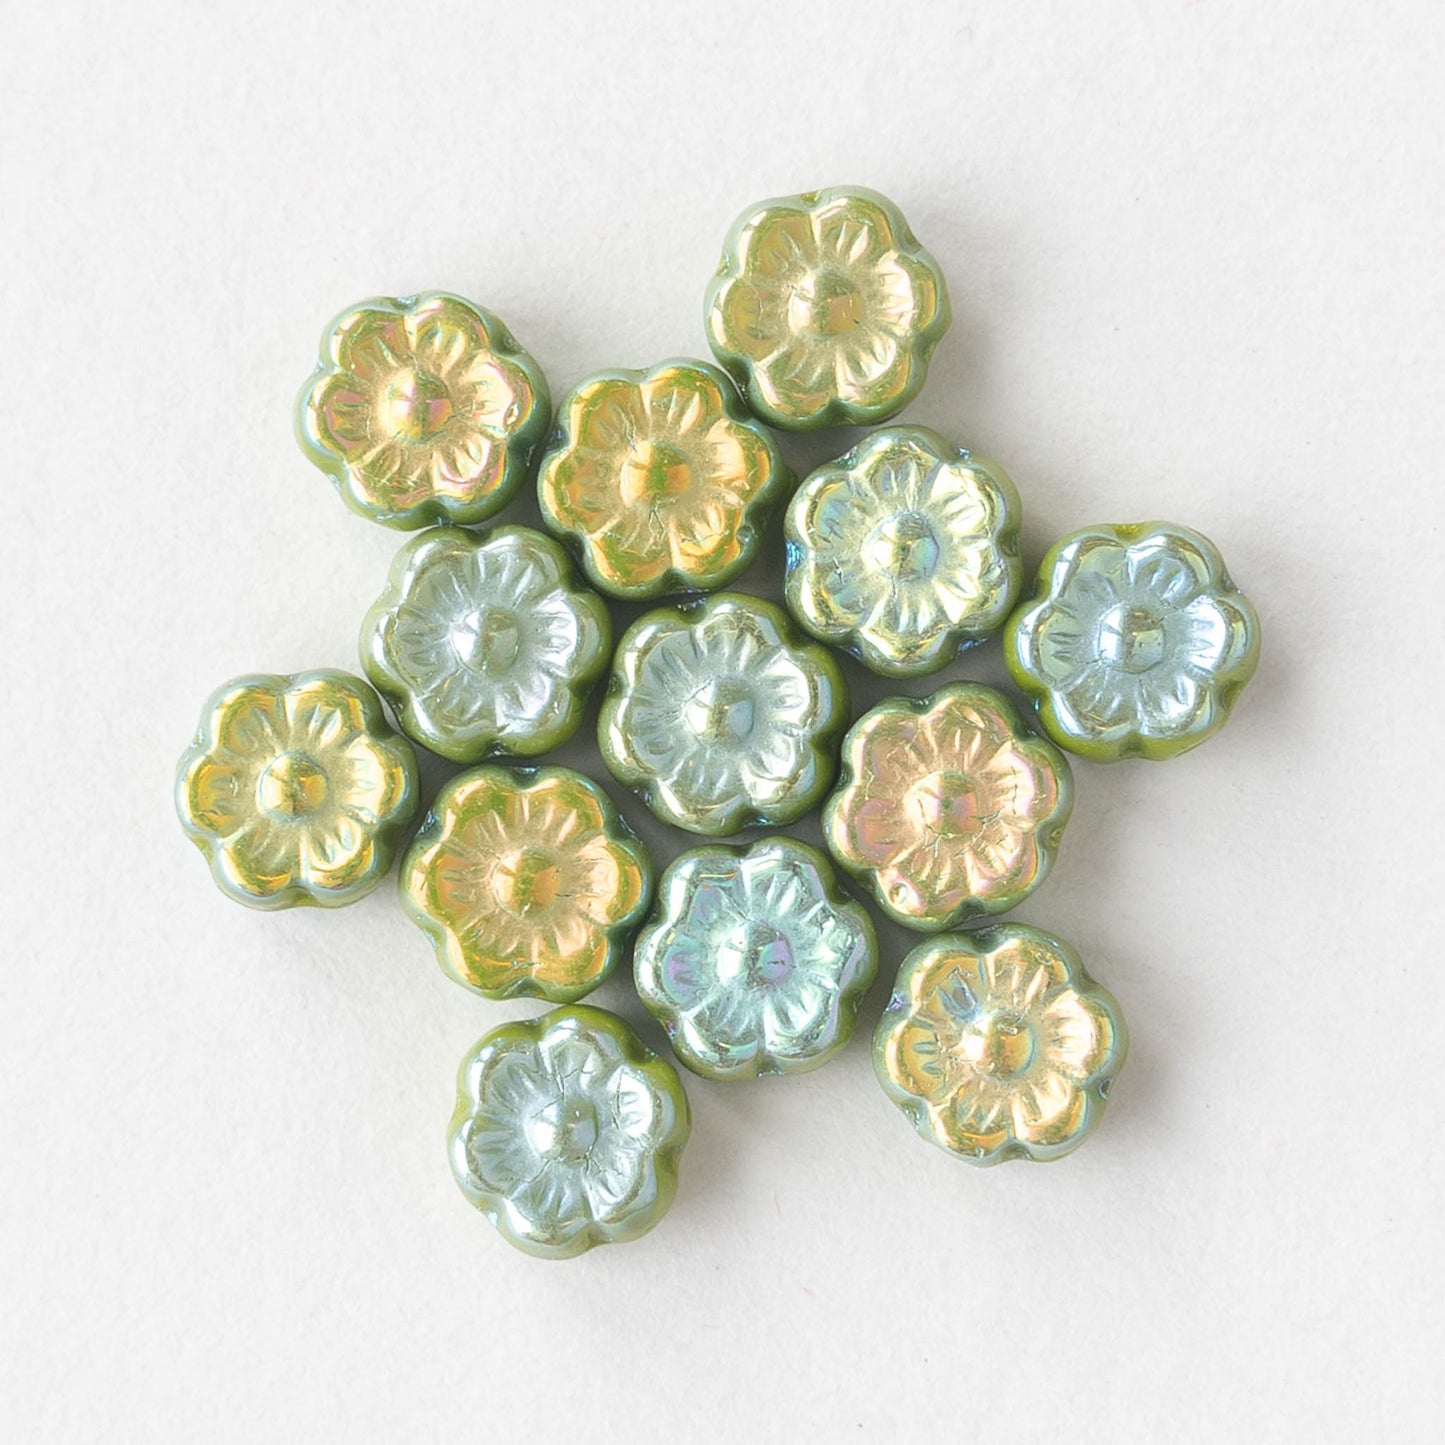 8mm Glass Flower Beads - Opaque Green AB Luster - 20 beads